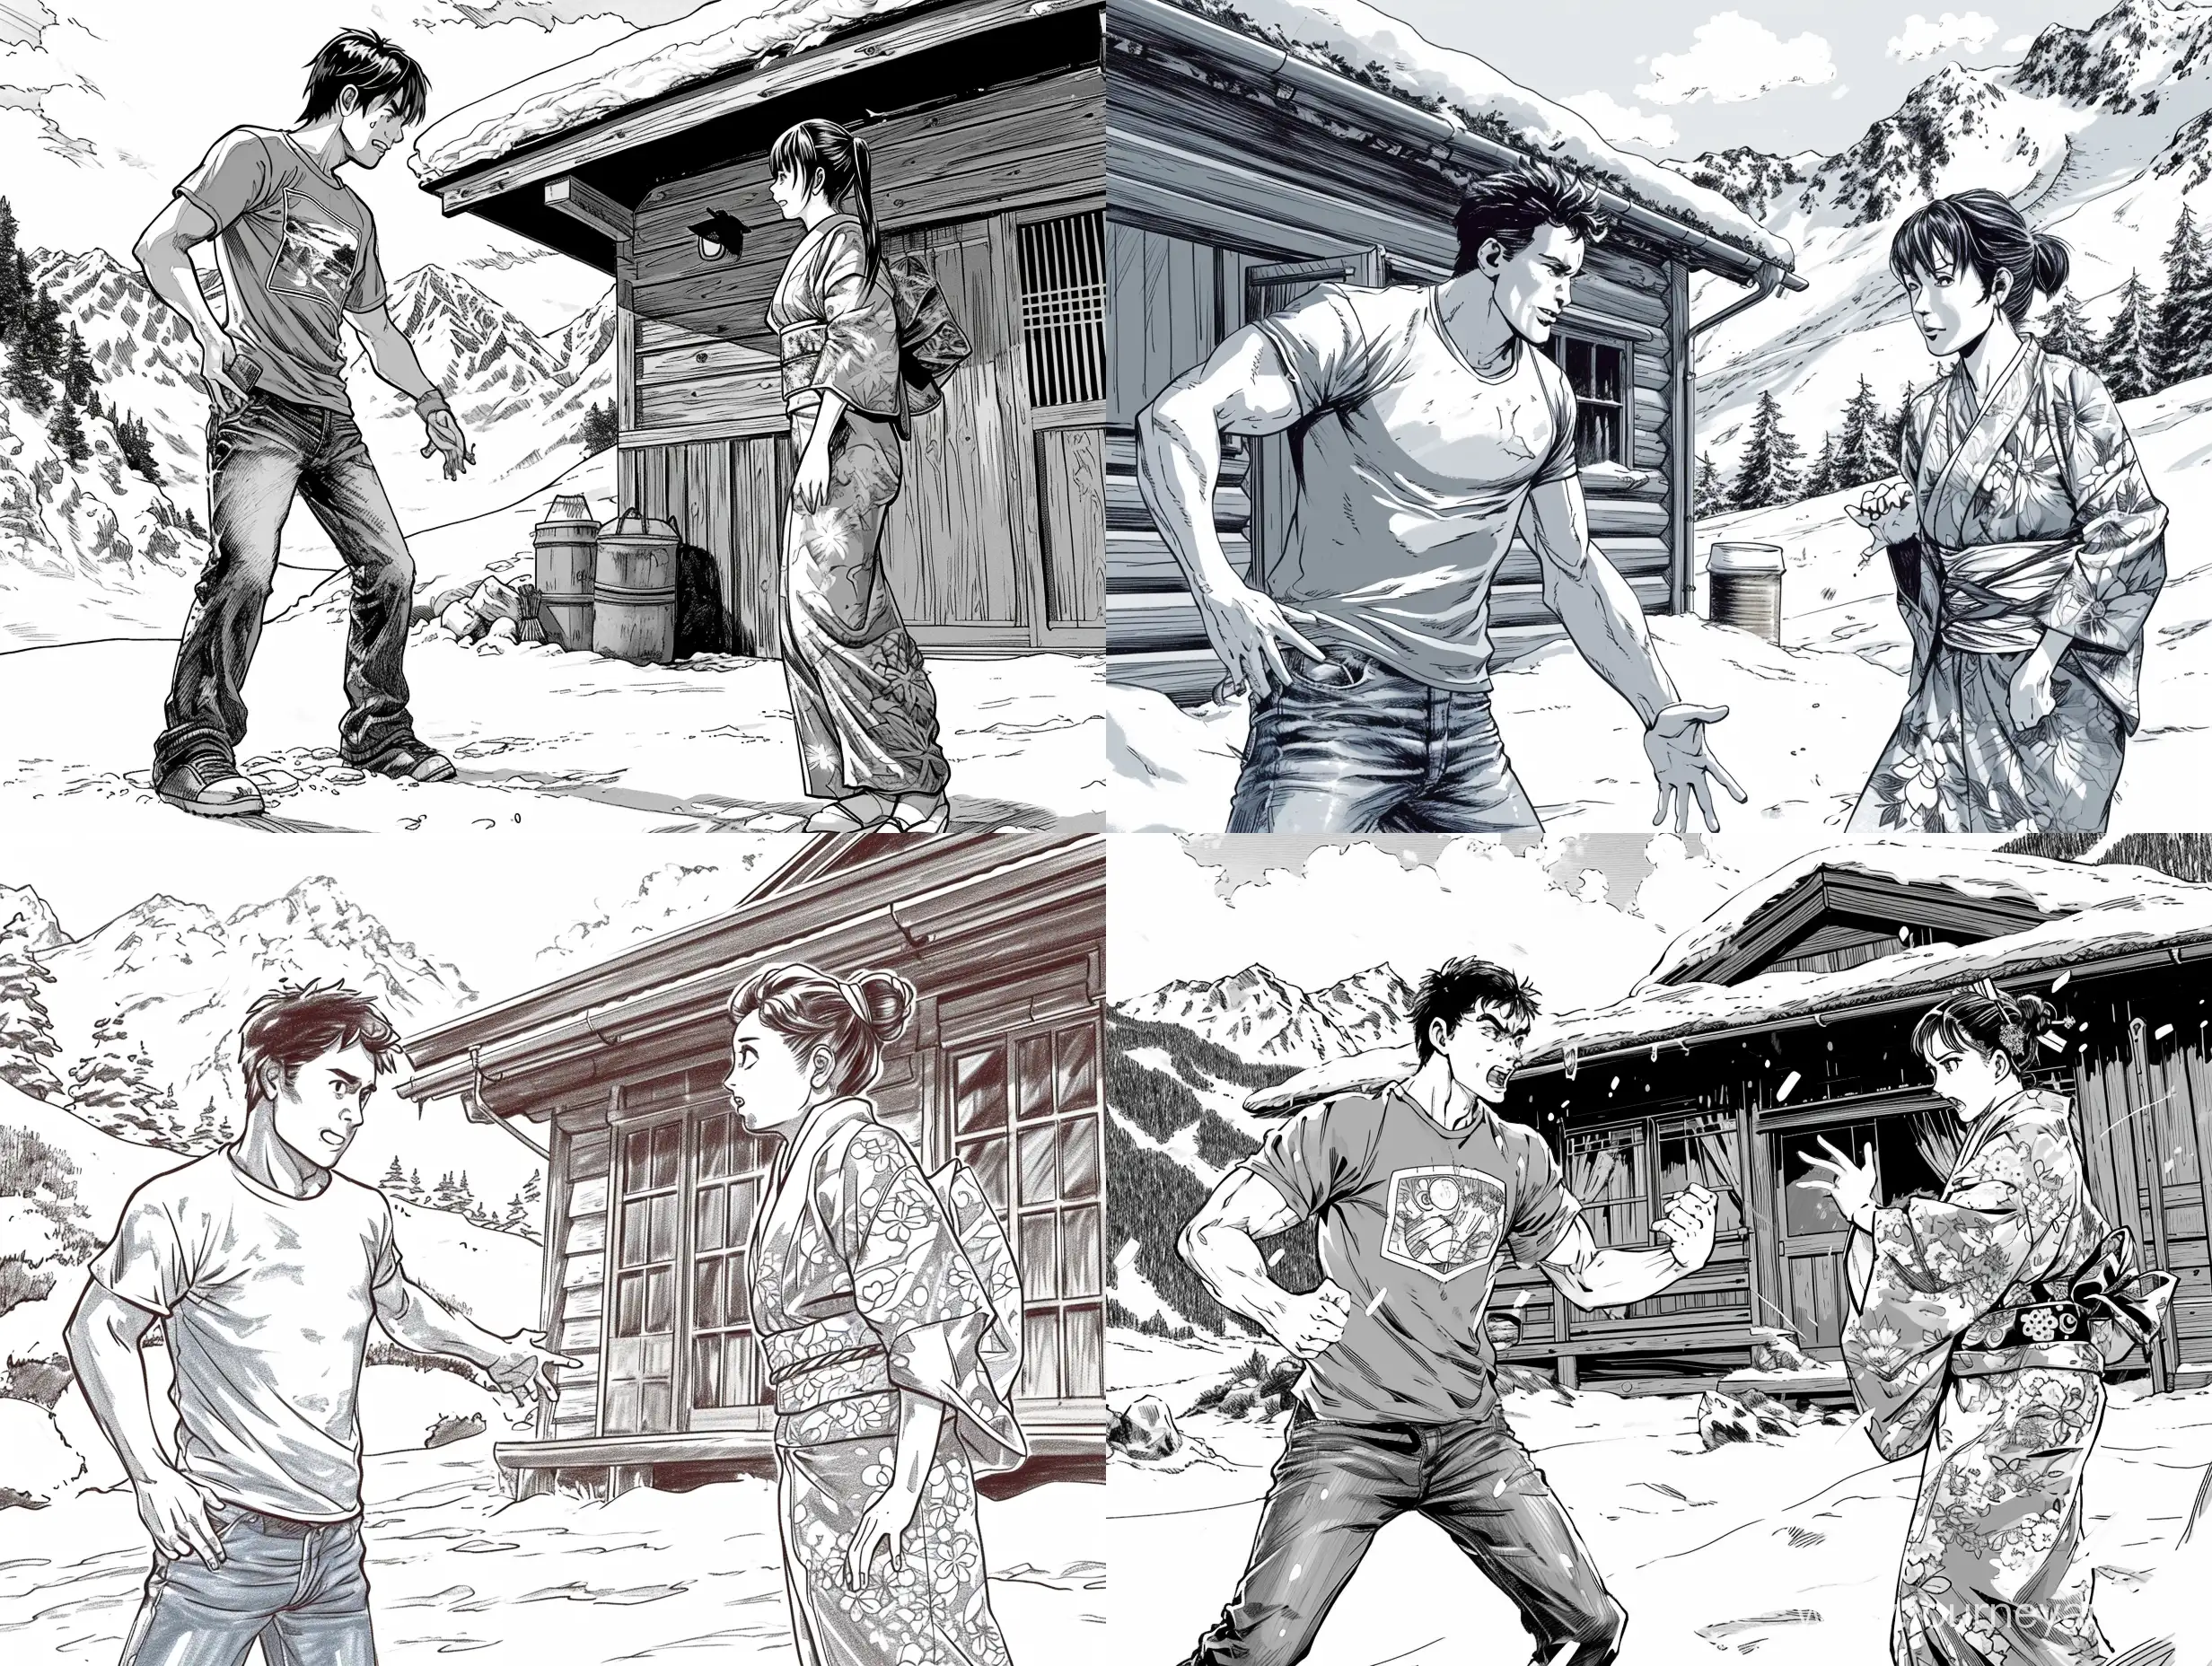 Snowy-Mountain-Conflict-Tense-Argument-Between-Man-in-Tshirt-and-Woman-in-Kimono